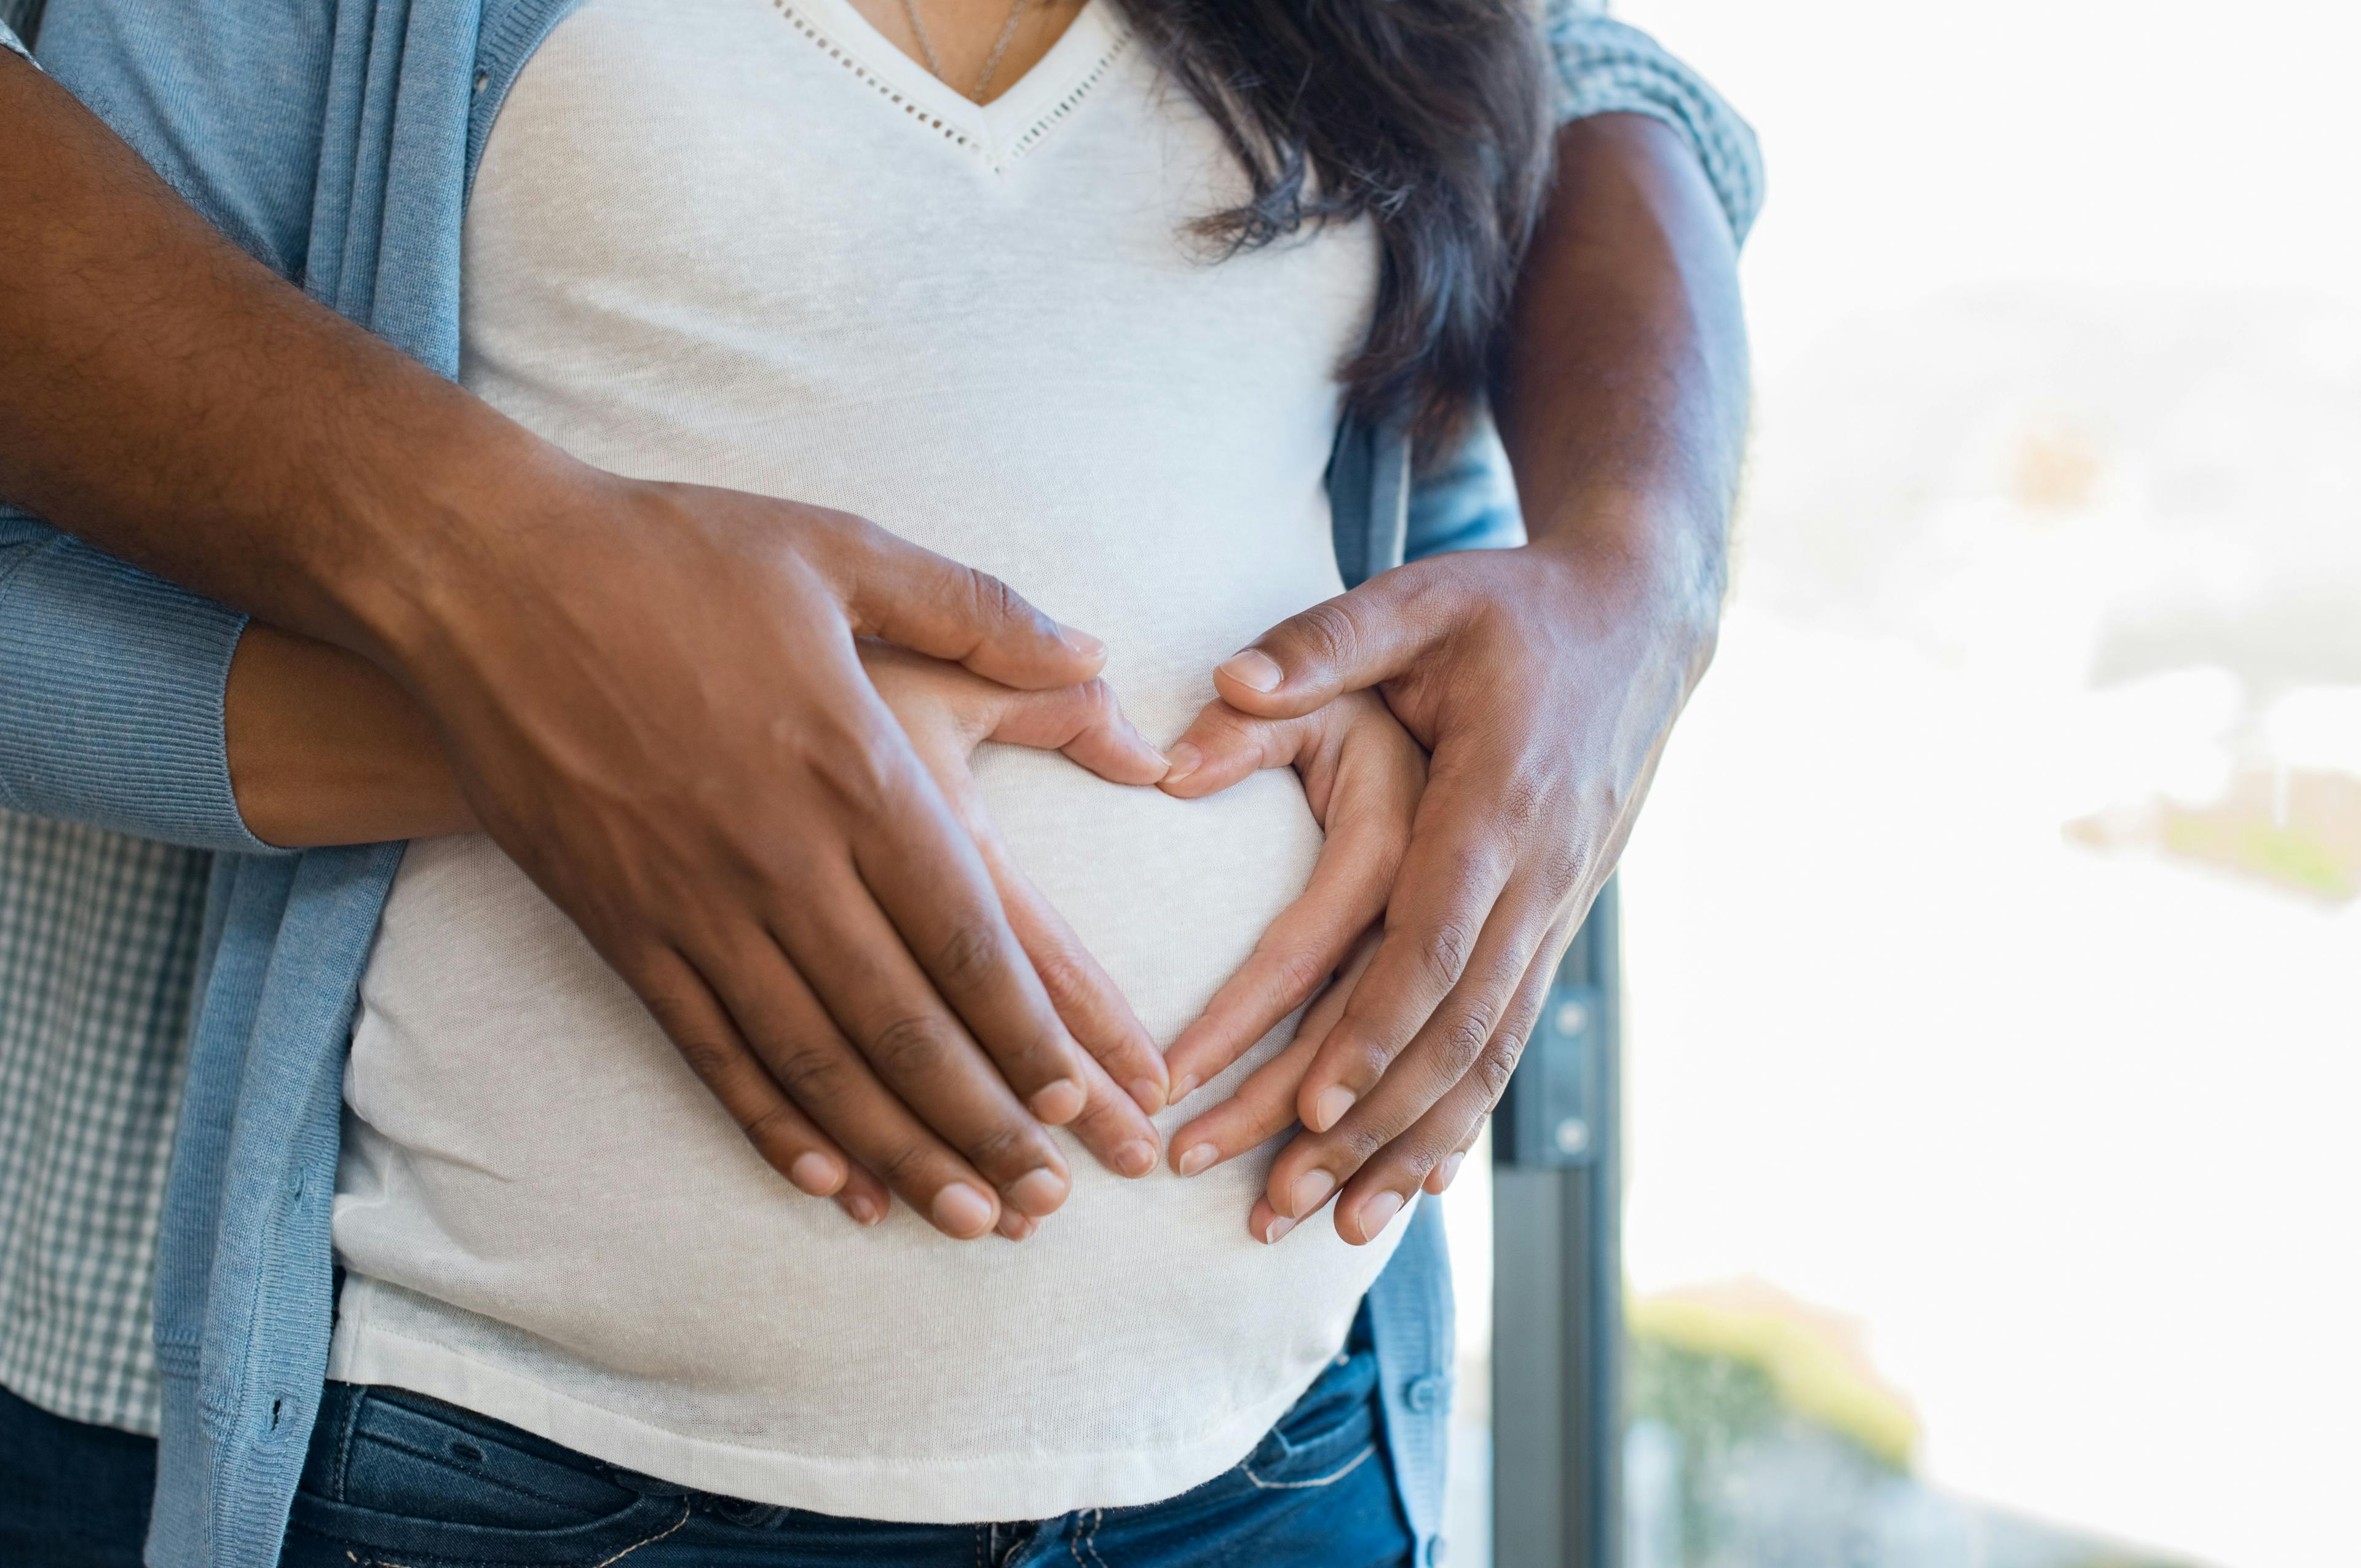 Antidepressant use during pregnancy does not increase risk of neurodevelopmental disorders